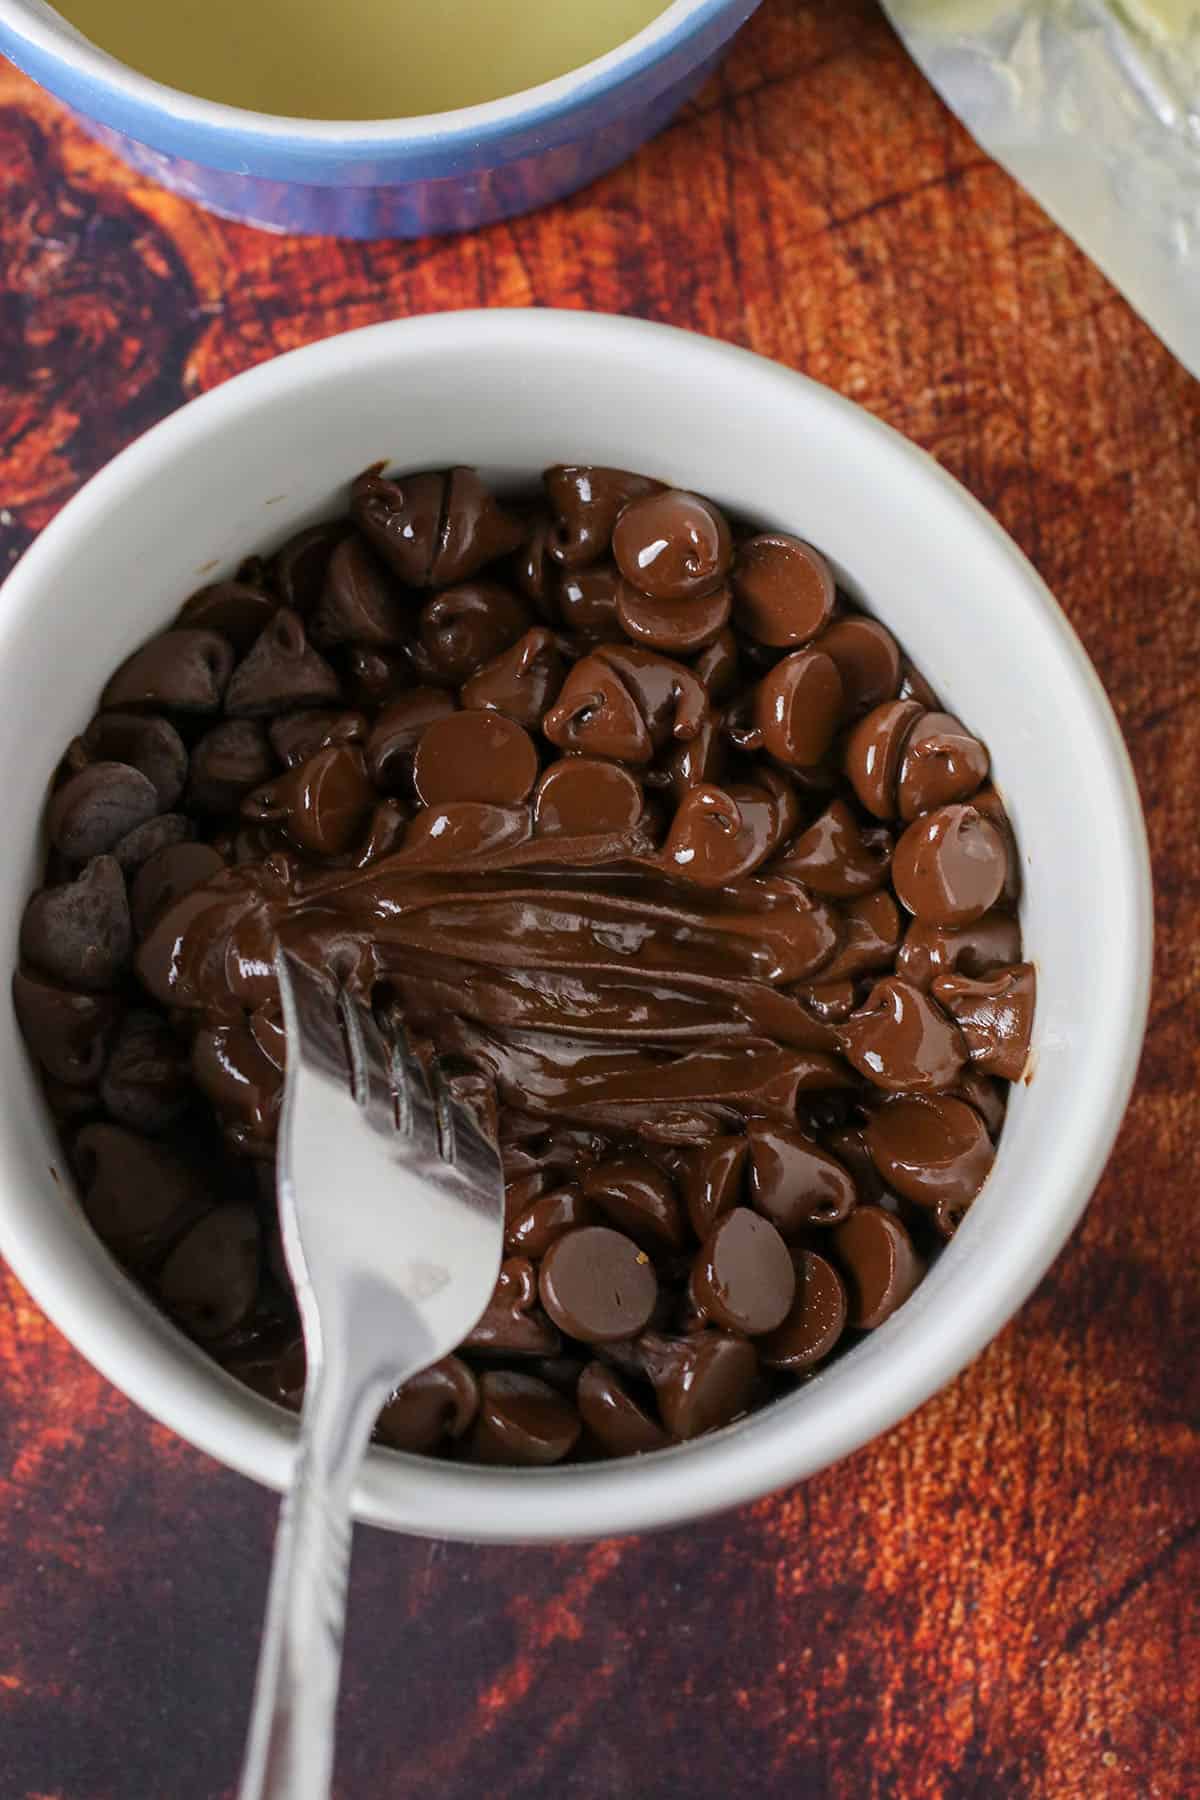 The melted chocolate chips right out of the microwave.